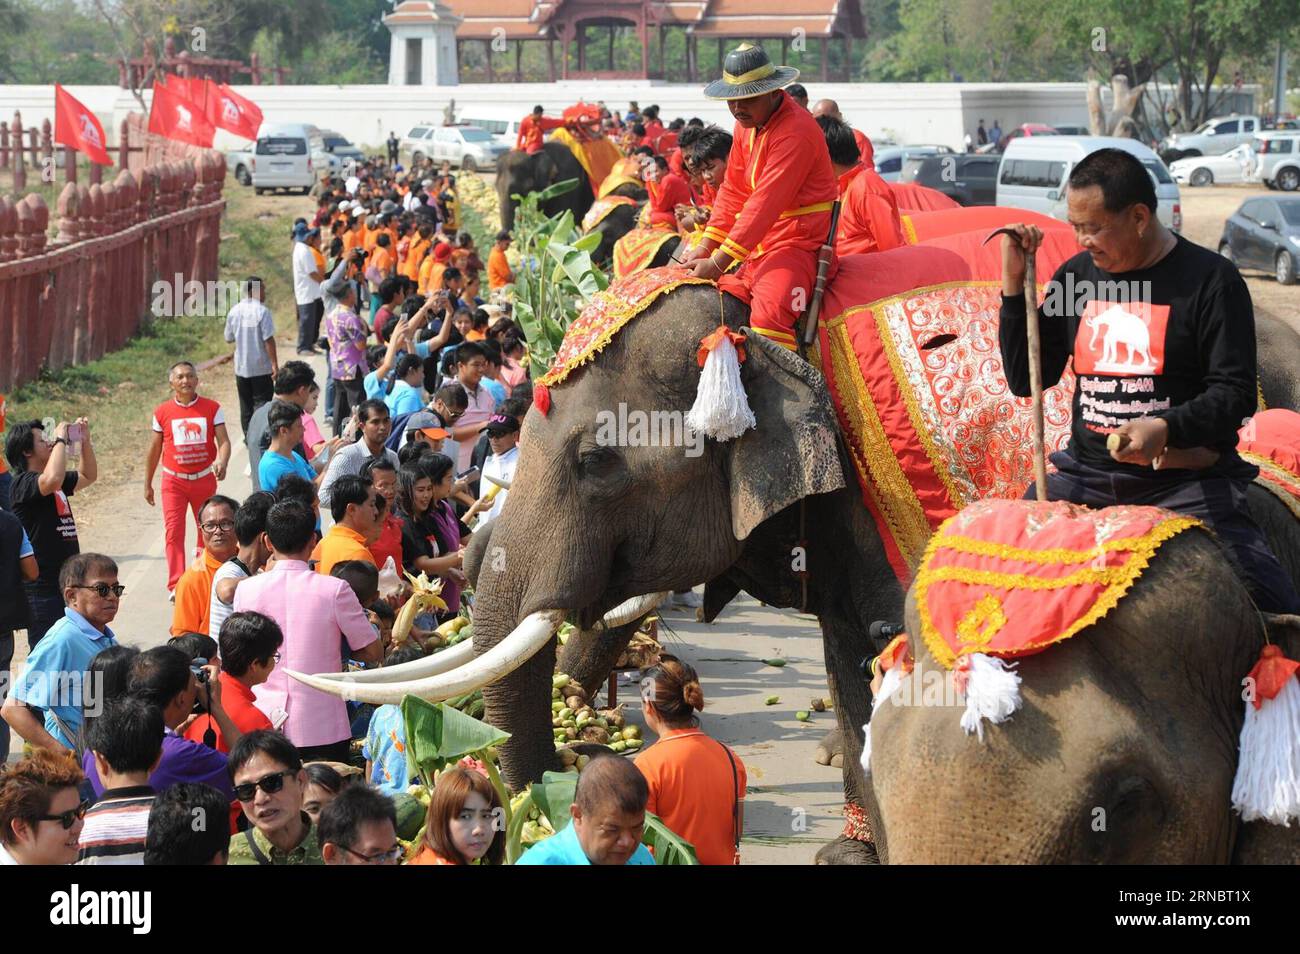 (160311) -- AYUTTHAYA, March 11, 2016 -- People feed elephants with vegetables during a National Elephant Day parade in Ayutthaya, Thailand, March 11, 2016. An elephant parade was held in Ayutthaya of central Thailand to observe the country s annual National Elephant Day and raise public awareness of saving the elephant species and protect its habitats. ) THAILAND-AYUTTHAYA-NATIONAL ELEPHANT DAY-PARADE RachenxSageamsak PUBLICATIONxNOTxINxCHN   Ayutthaya March 11 2016 Celebrities Feed Elephants With Vegetables during a National Elephant Day Parade in Ayutthaya Thai country March 11 2016 to Elep Stock Photo